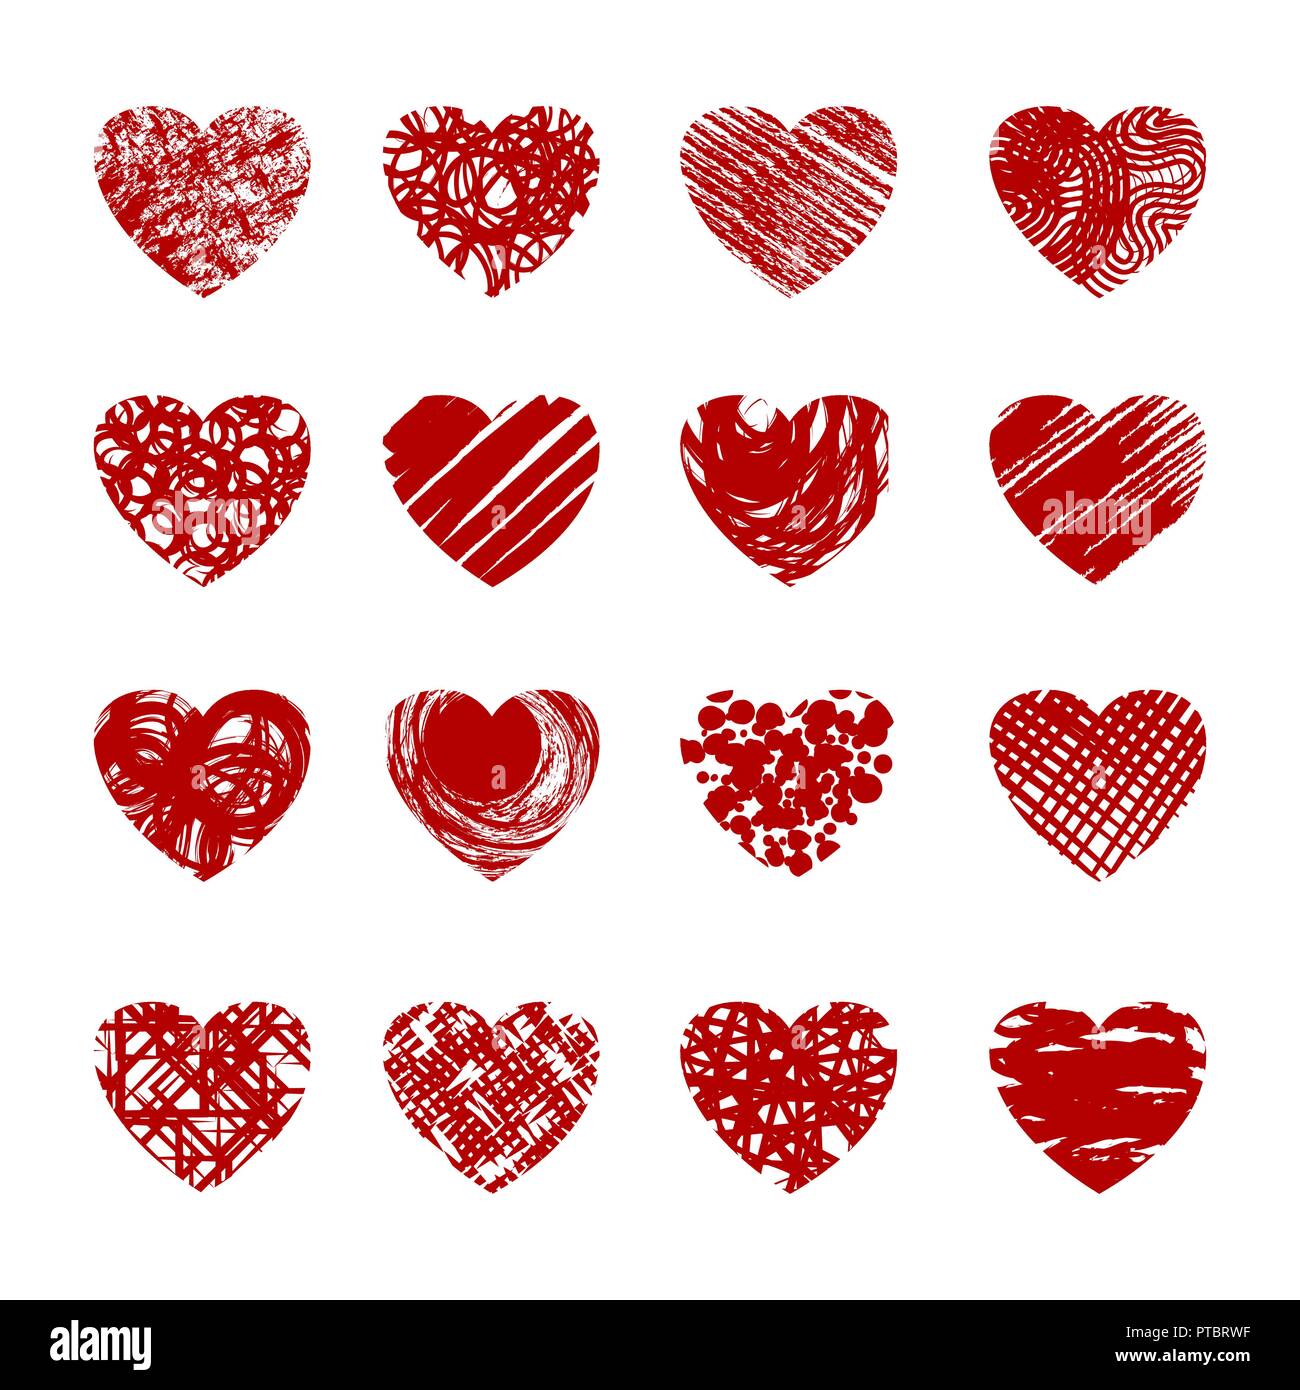 Red drawing hearts. Cartoon sketch hearted vectors, abstract love symbols isolated on white background Stock Vector